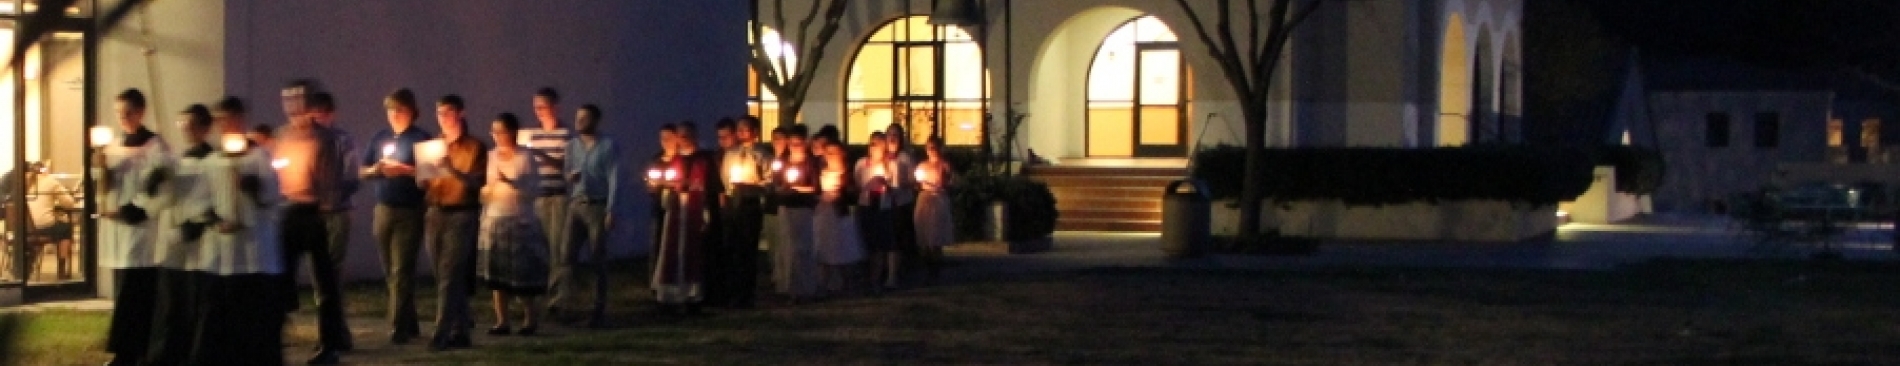 Slideshow: Our Lady of Lourdes Candlelight Procession